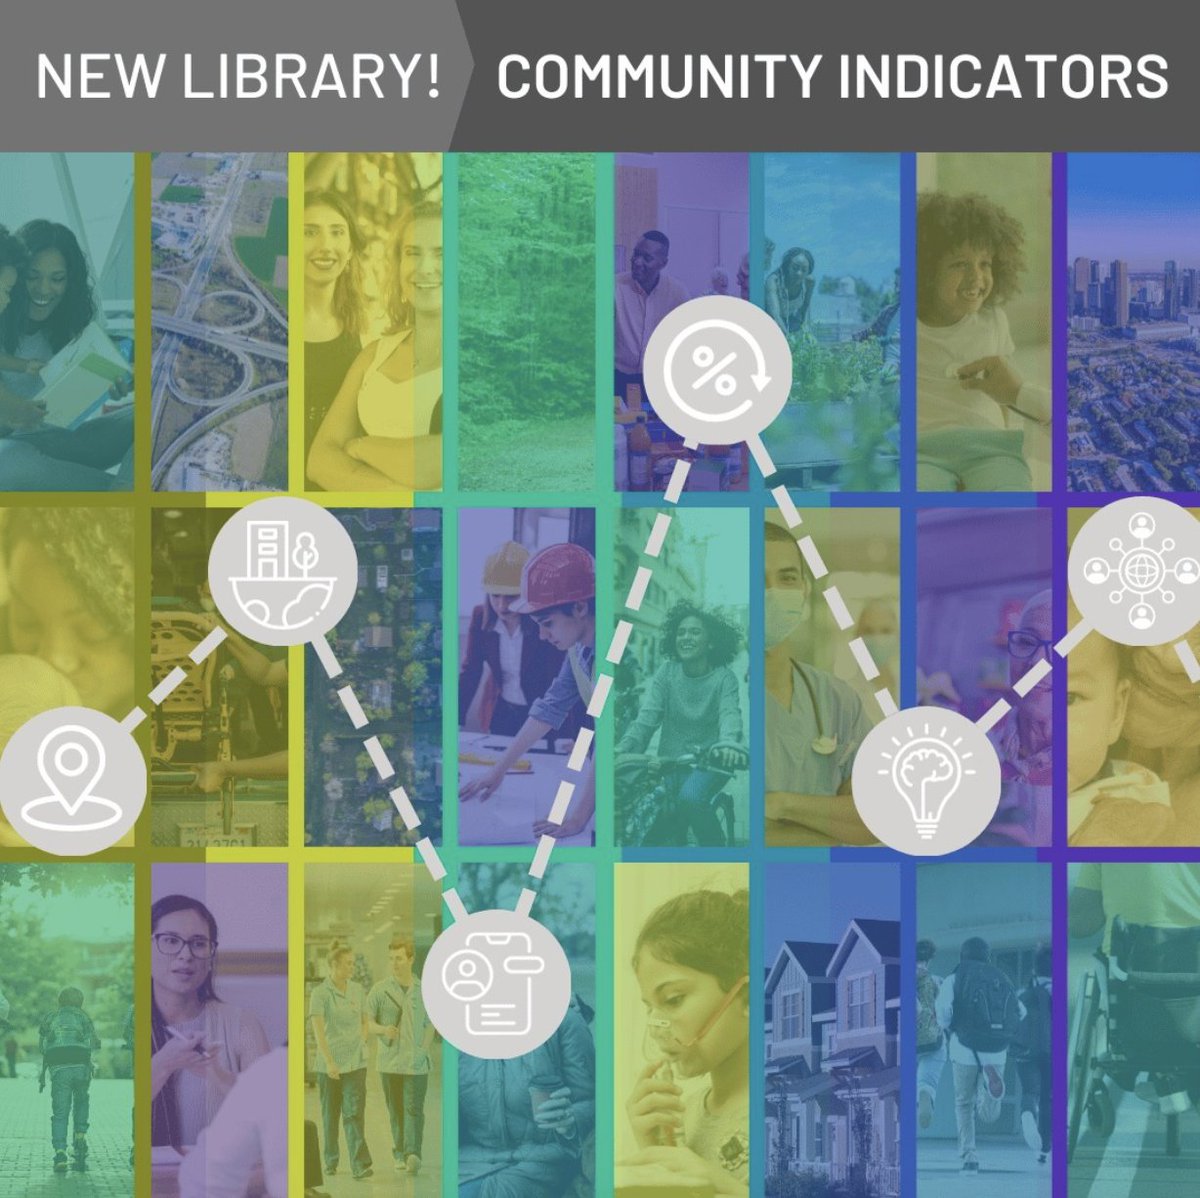 A4 We recently launched the Community Indicator Library, a living library of metrics that changemakers can use to measure health & equity in communities. Find indicators relevant to your work, identify datasets & sources & explore related topics: bit.ly/41RjETg #NPHWChat